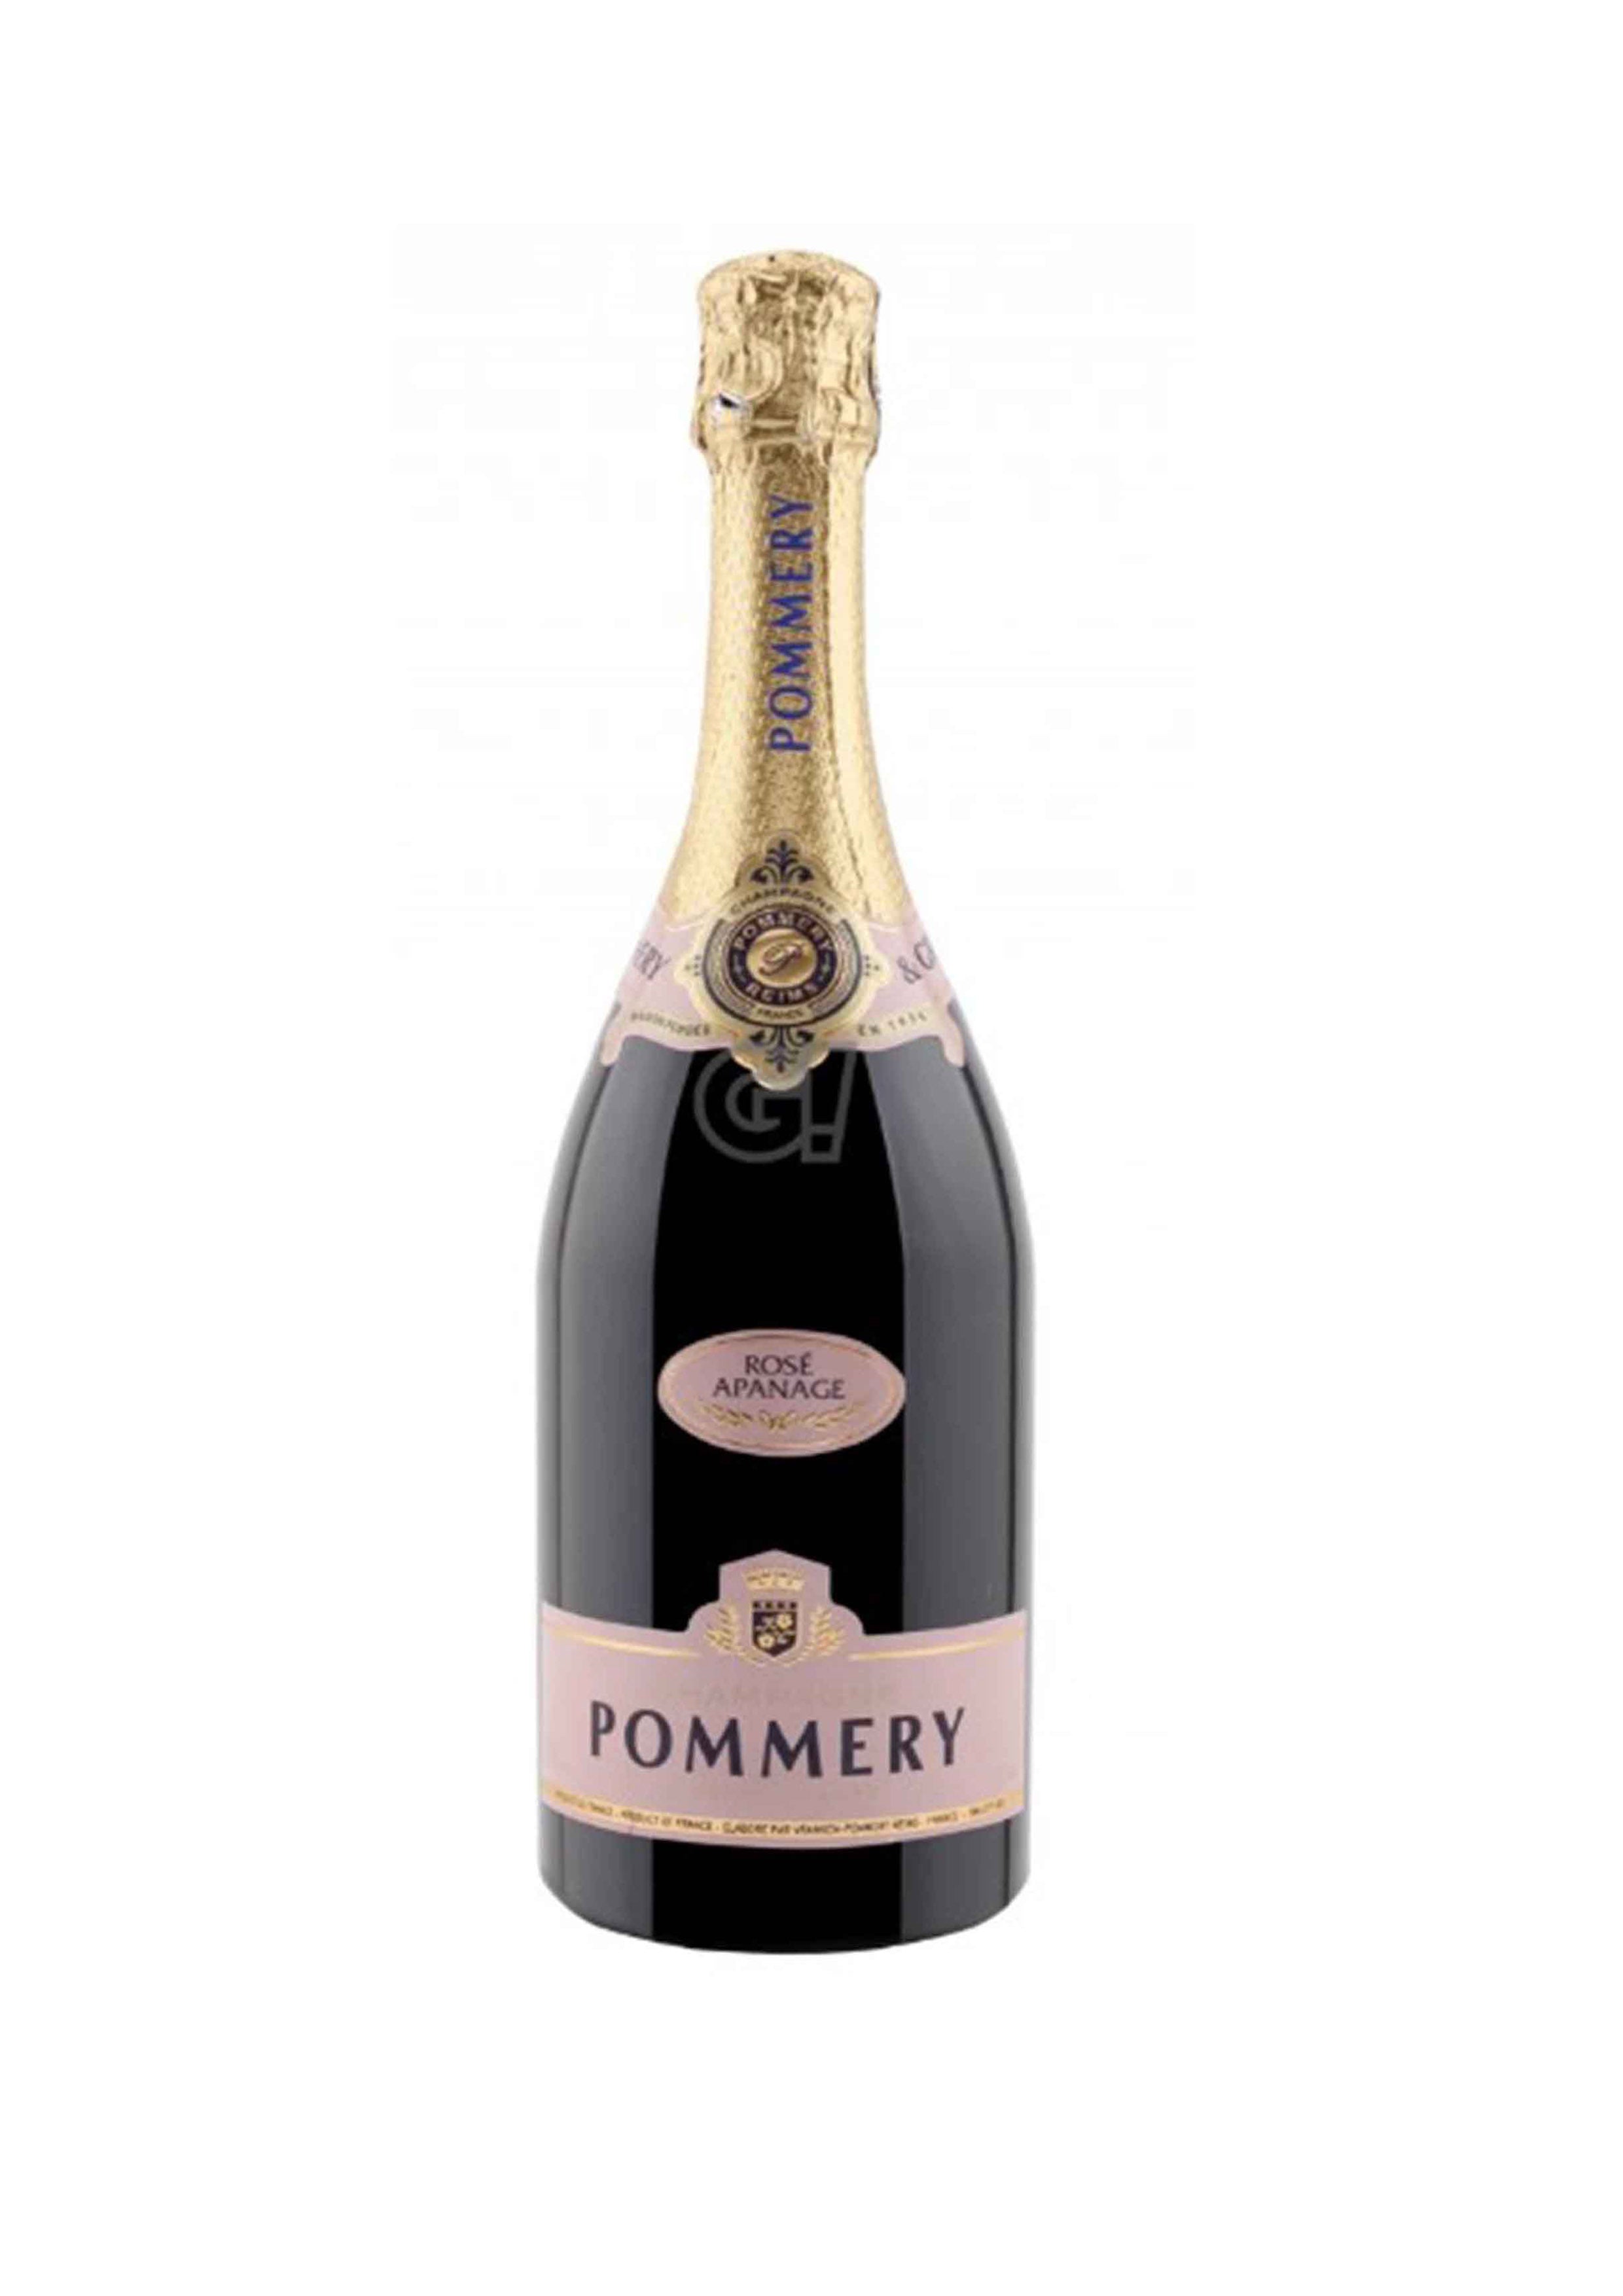 Champagne Pommery Rose Apanage